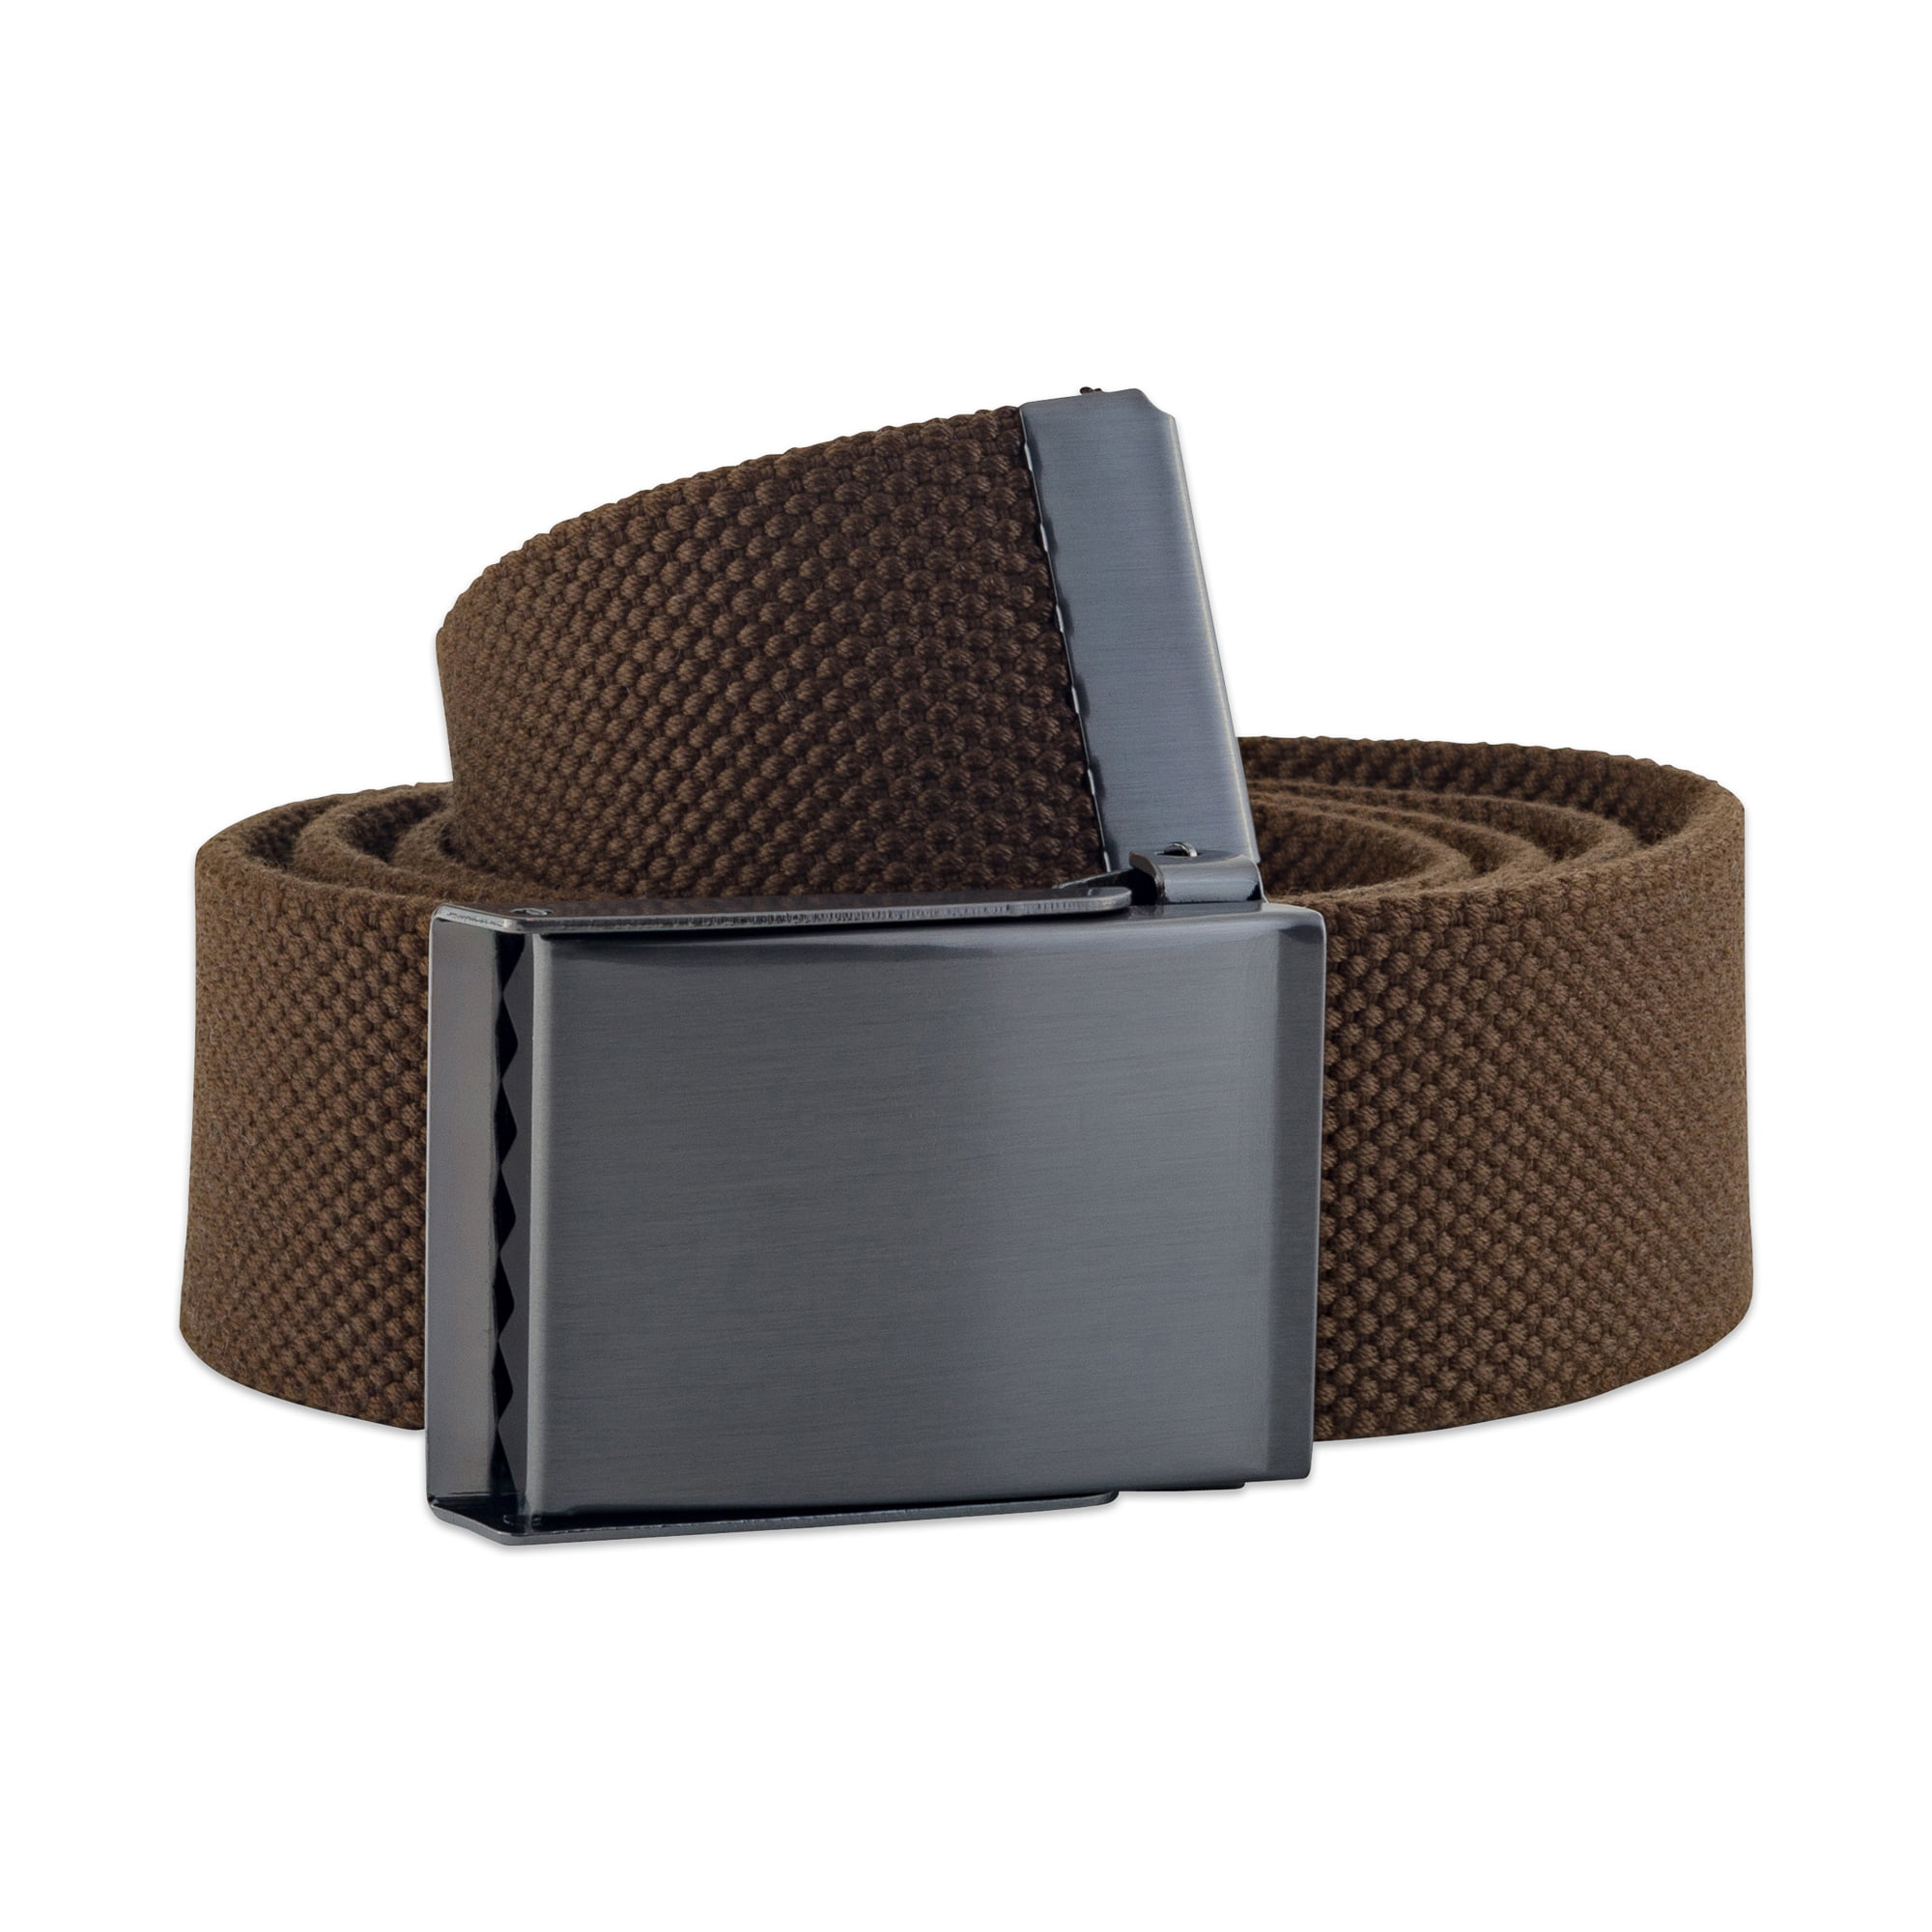 Forthery Mens Military Web Belt Casual for Jeans Adjustable One Size Cotton Strap and Plaque Buckle 